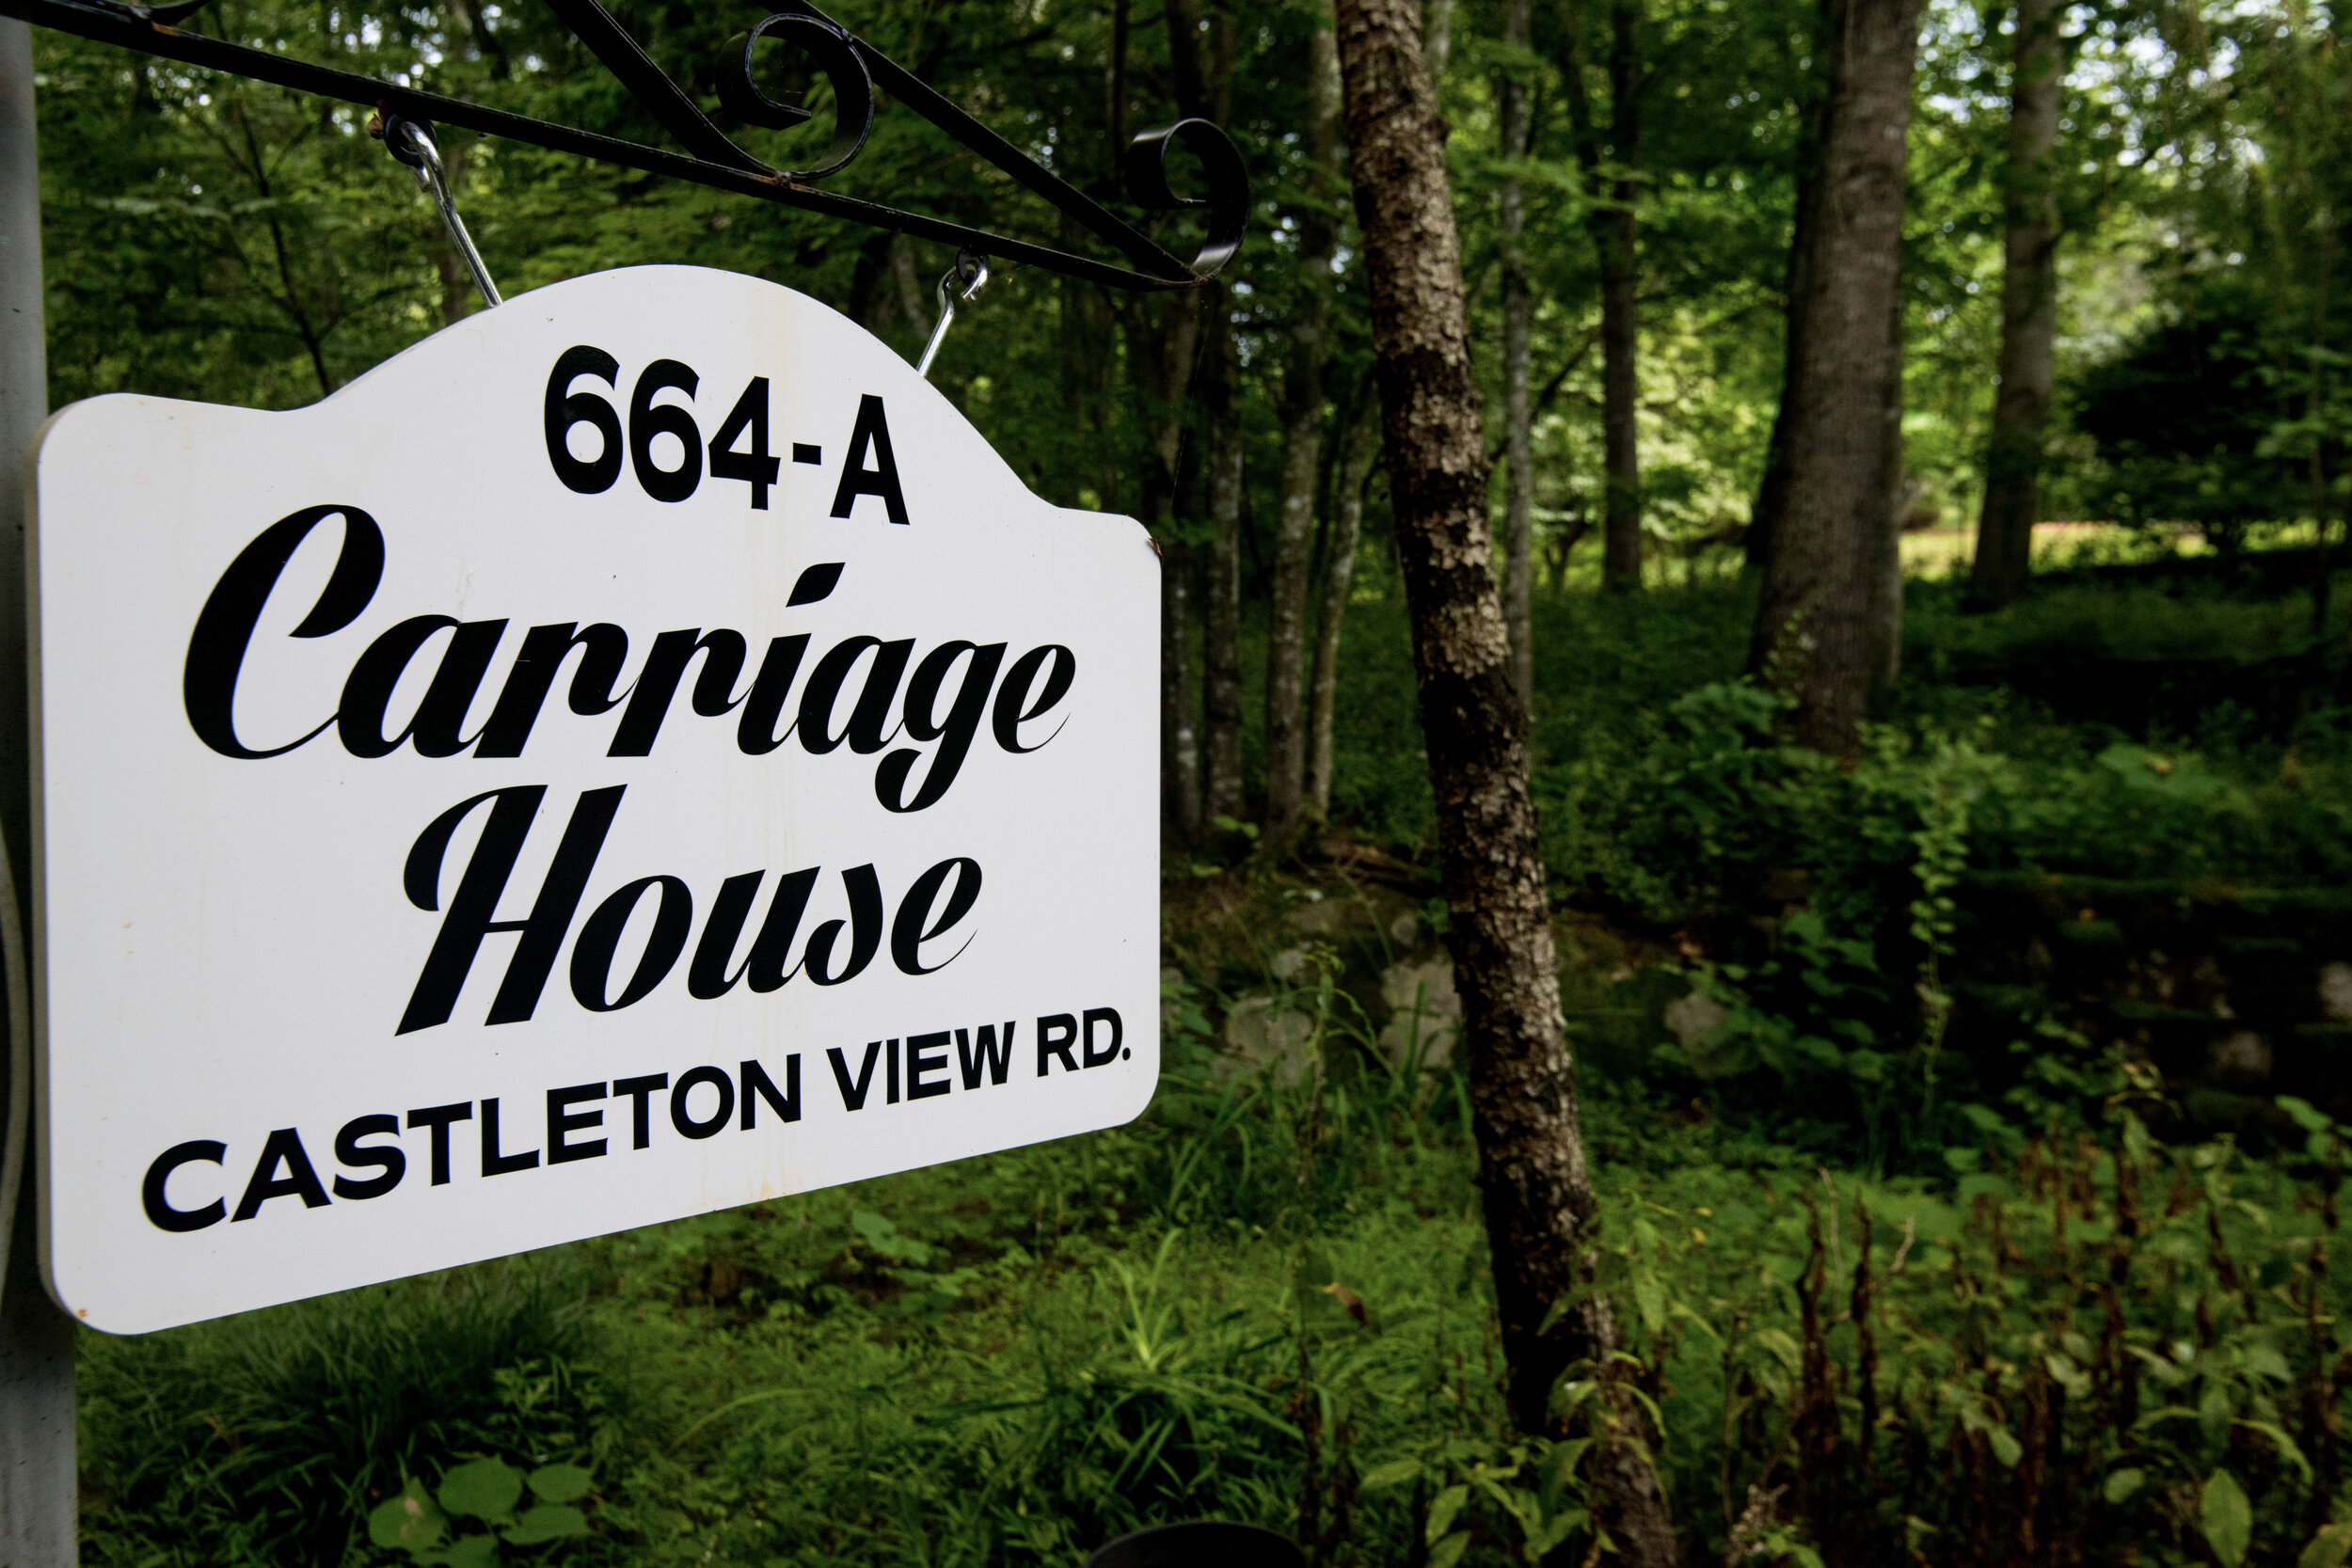 5-Carriage House Sign-3402.jpg